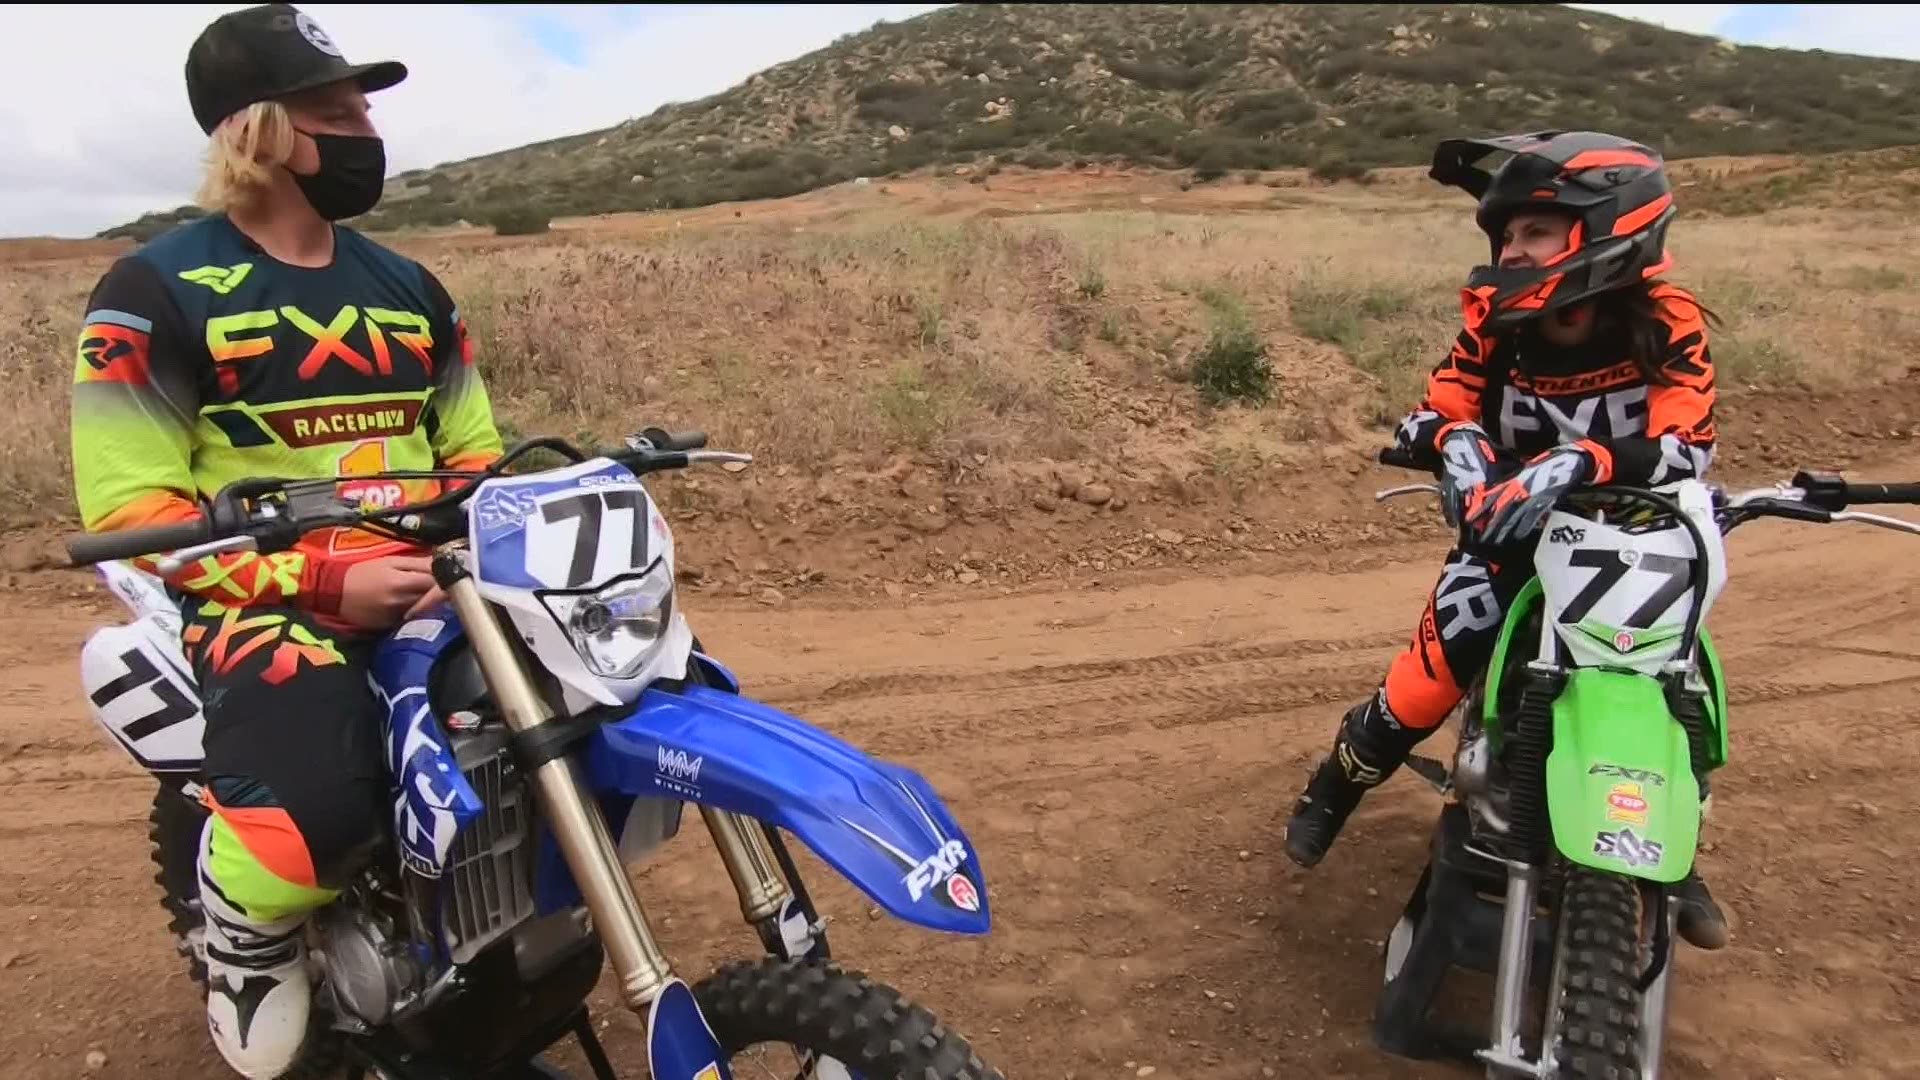 Jenny is out for dirt bike redemption at Sedlak Offroad School after falling while riding during a segment in 2020.